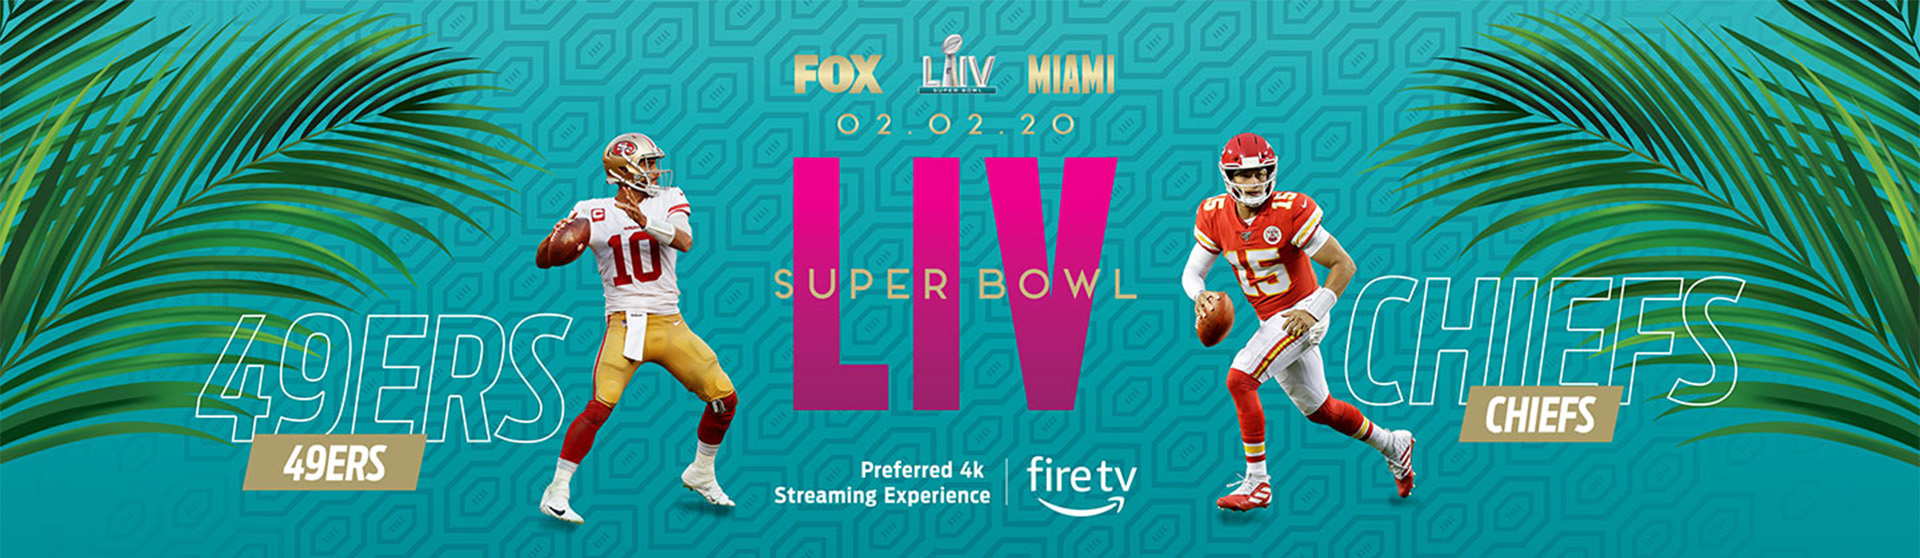 where can i stream the super bowl 2022 for free